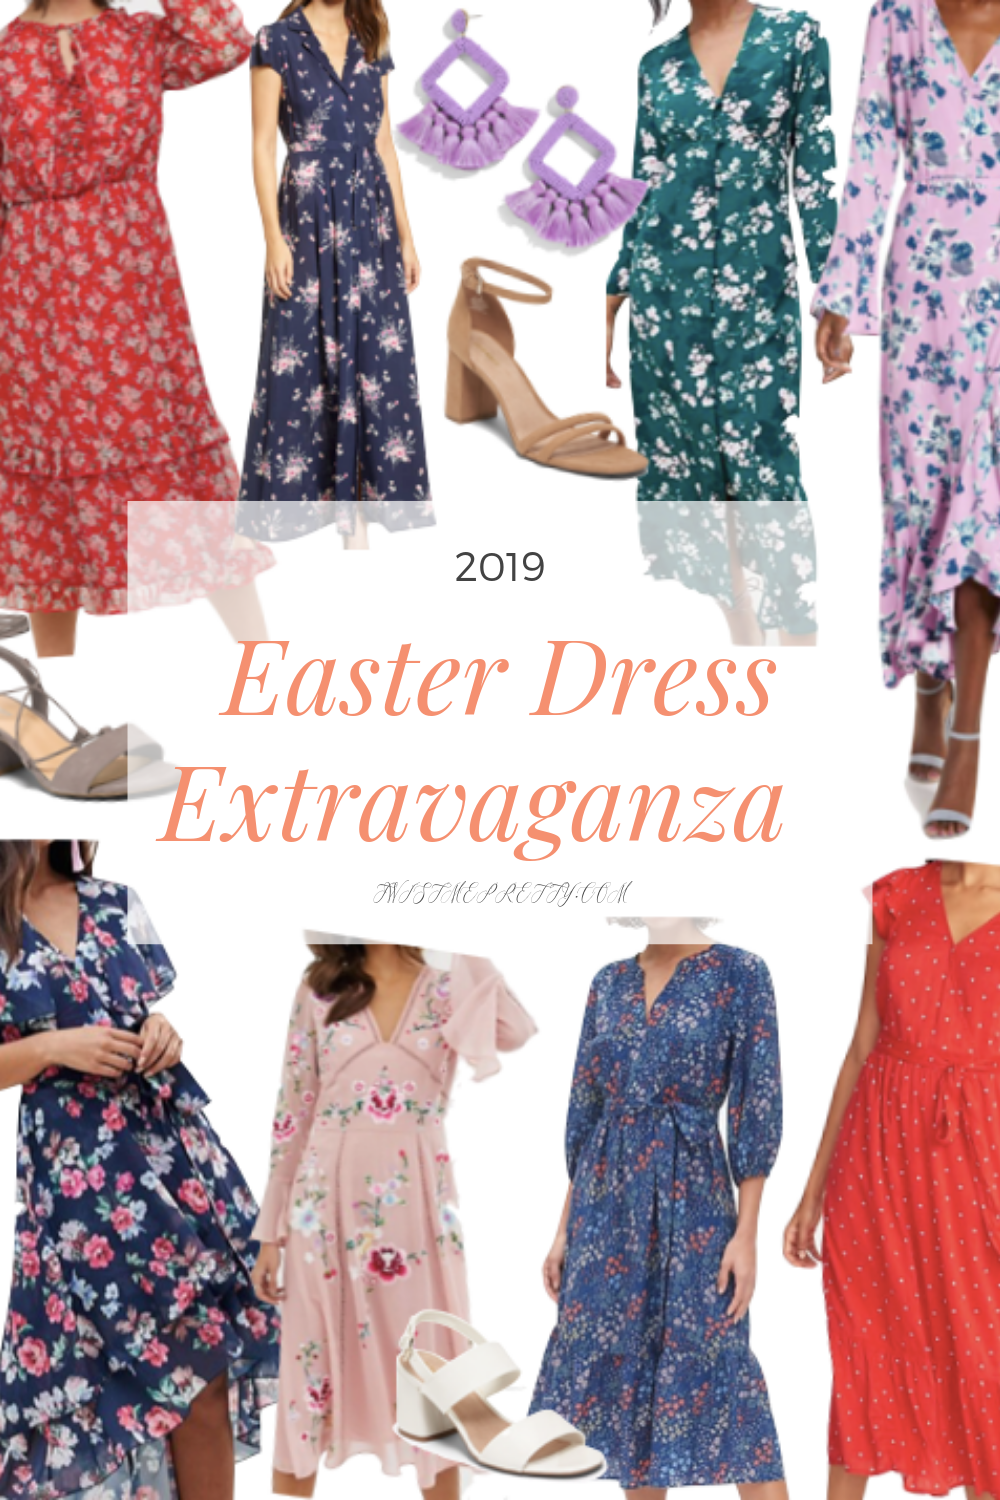 Easter Dress and accessories with twistmepretty.com